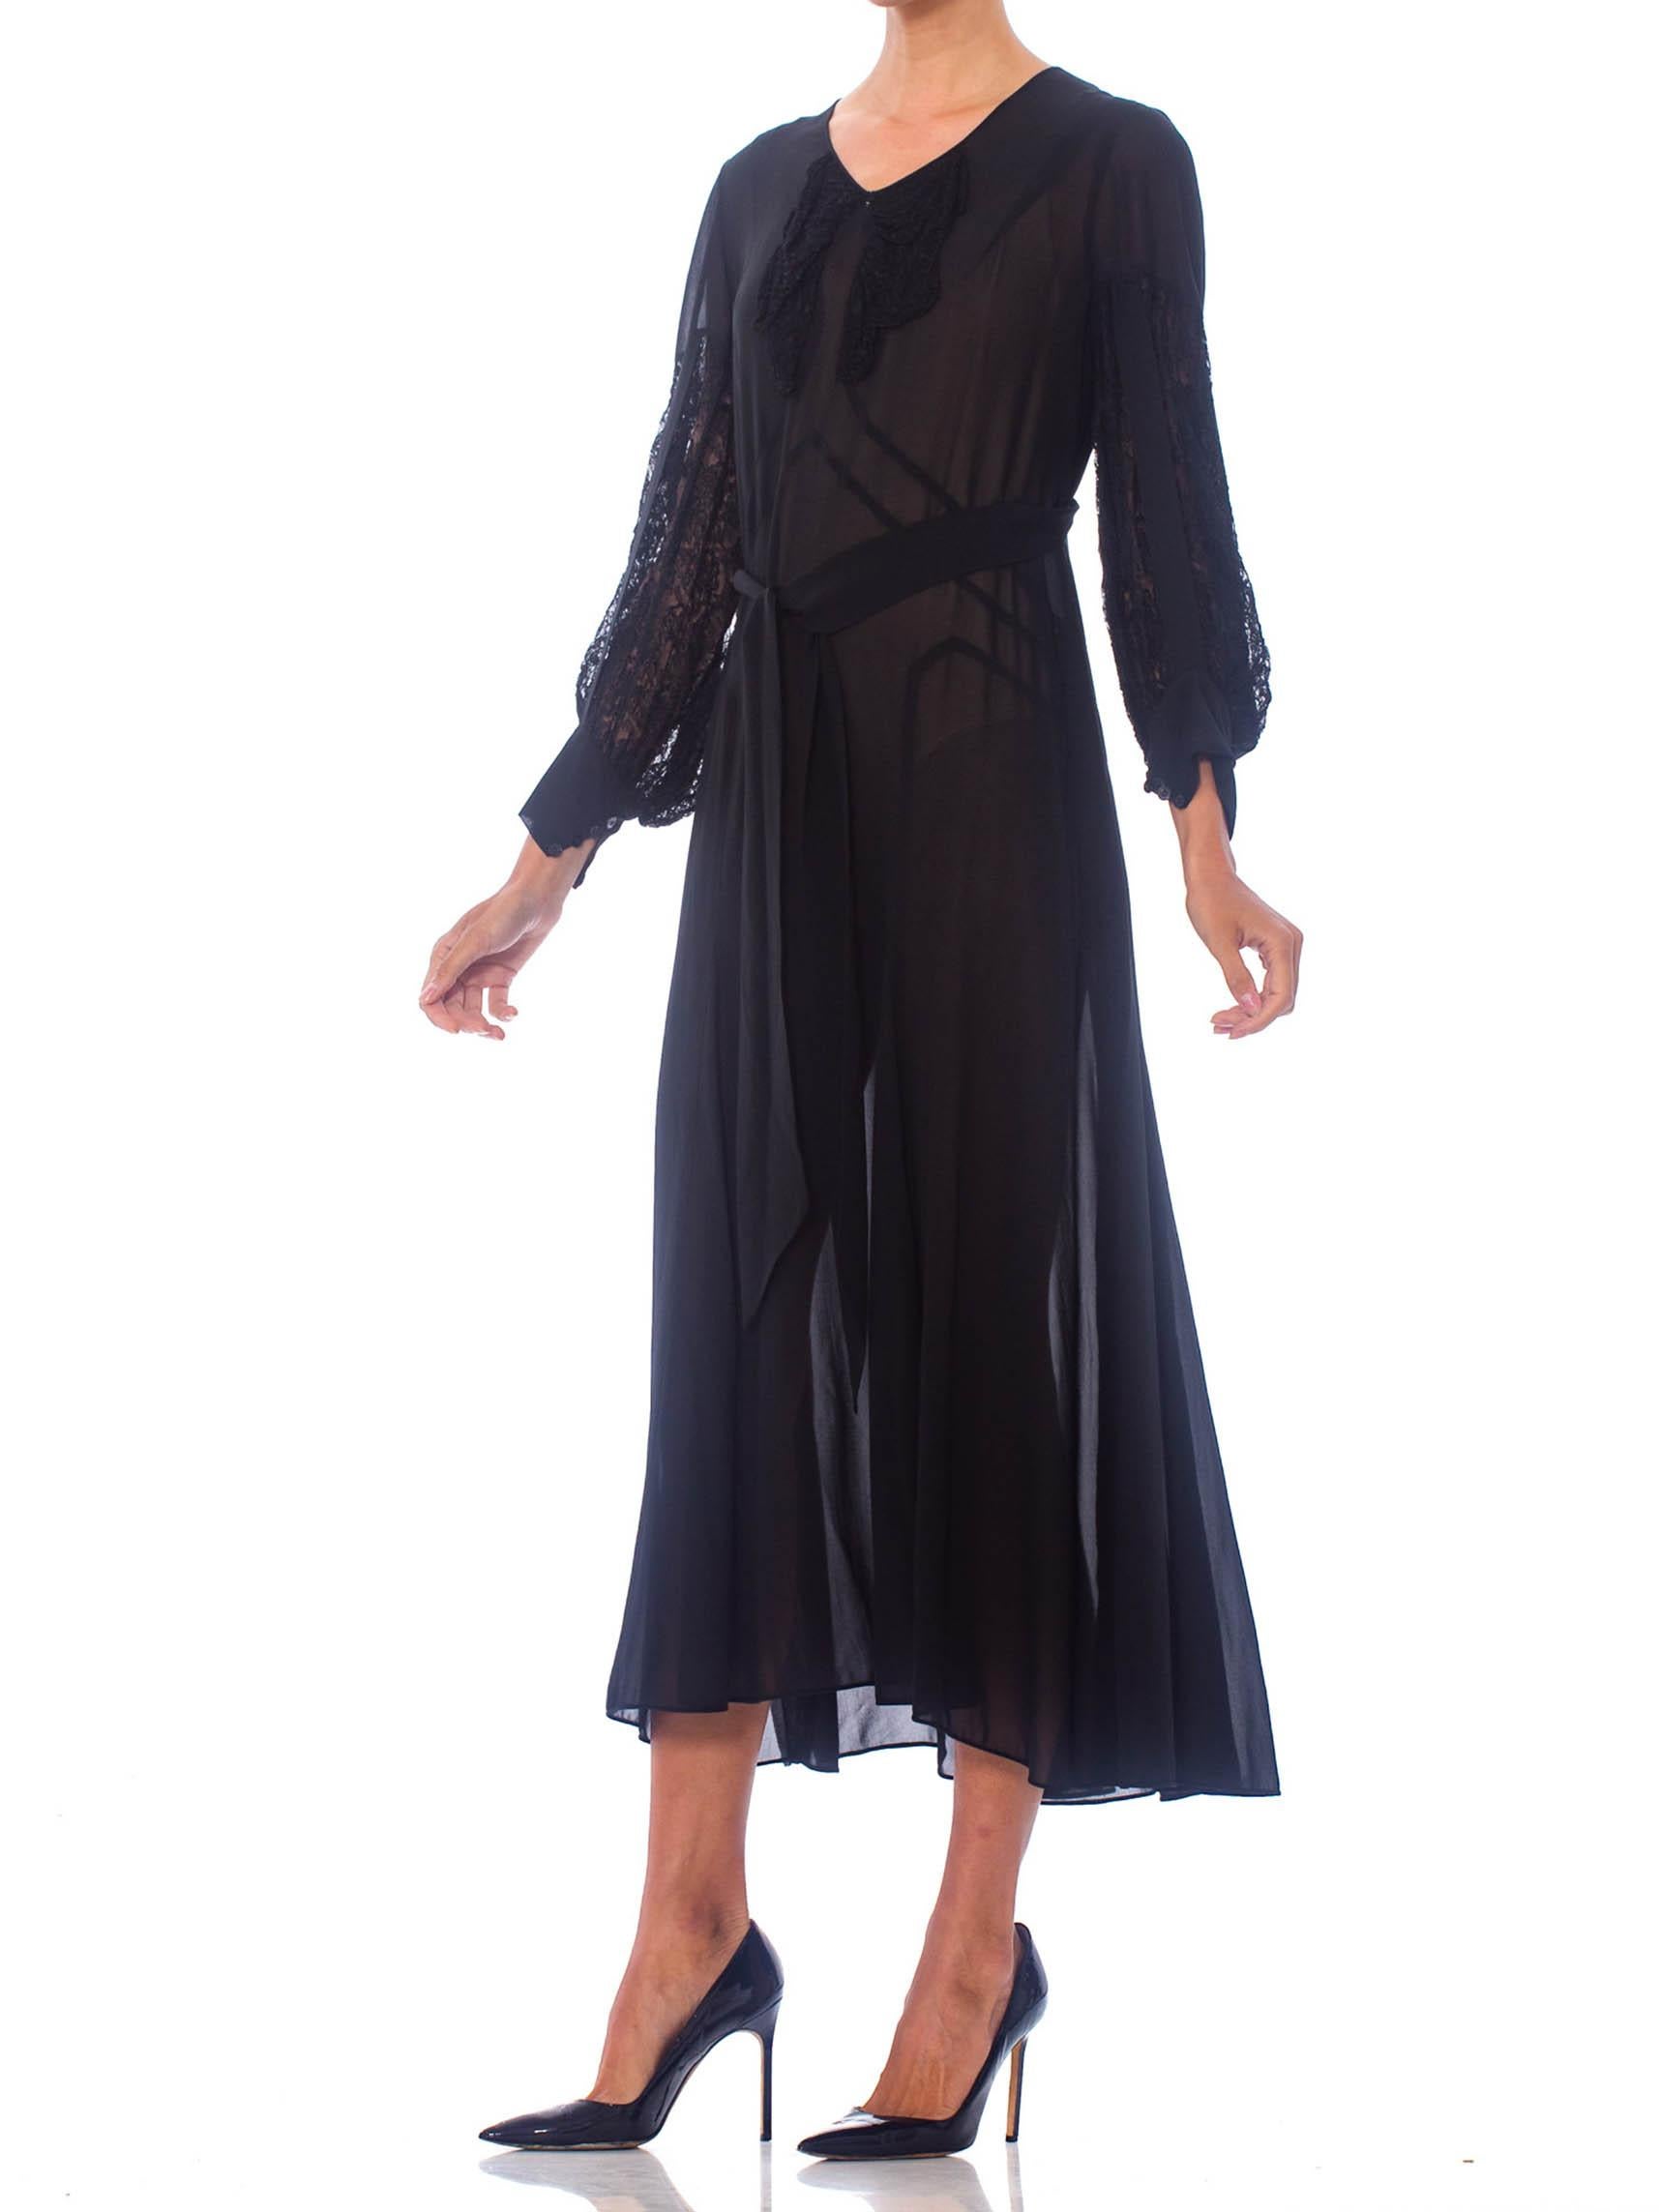 1930S Black Silk Chiffon Tie Waist Dress With Lace Inset Sleeves For Sale 3